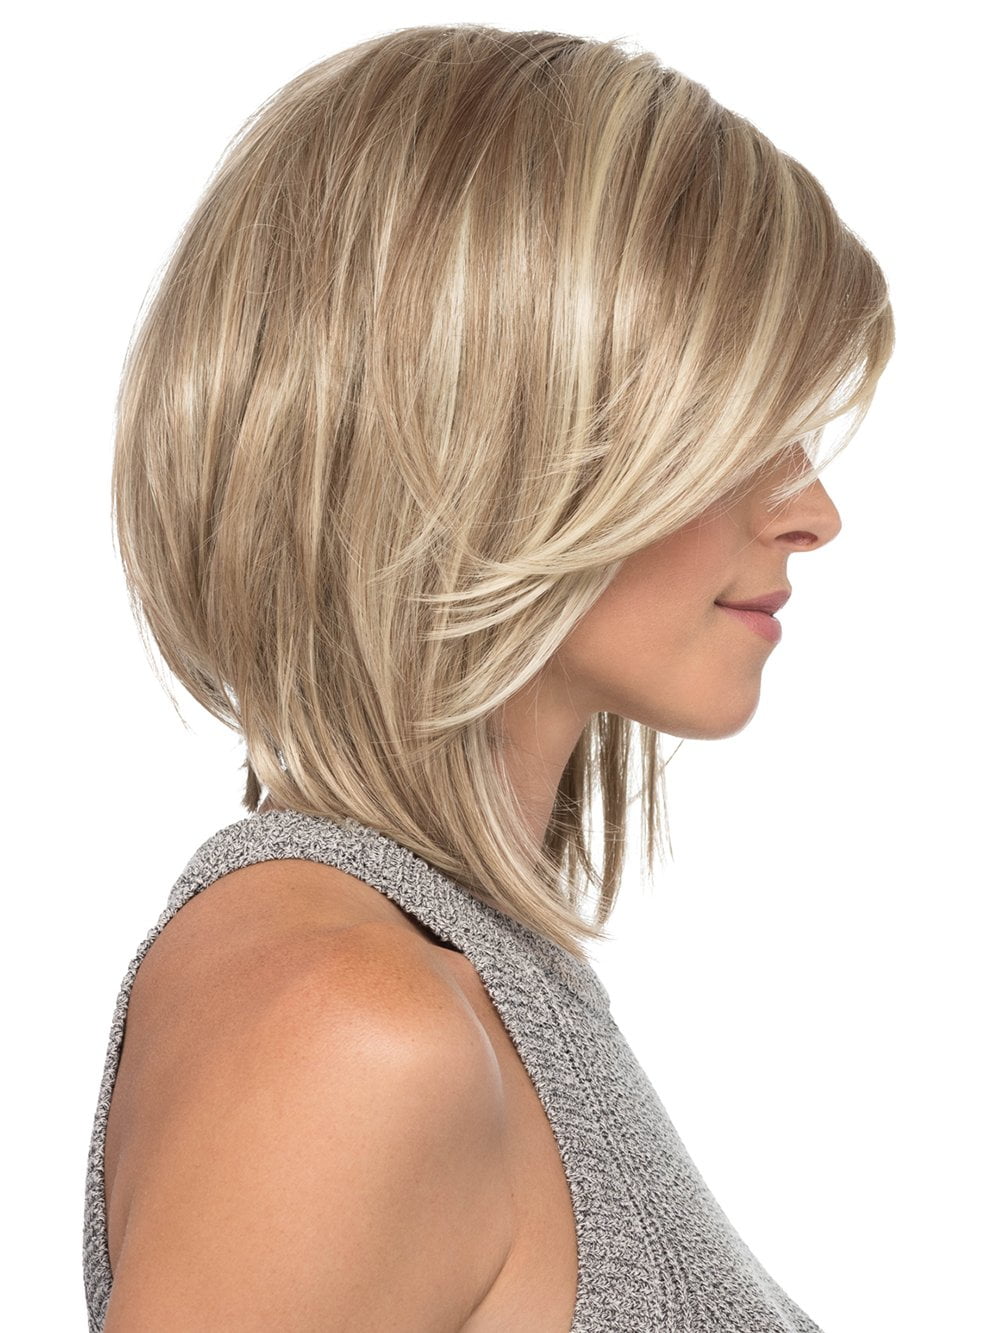 Her slightly angled layers and flowing side bangs make this shoulder length style simple and sleek for a perfect evening